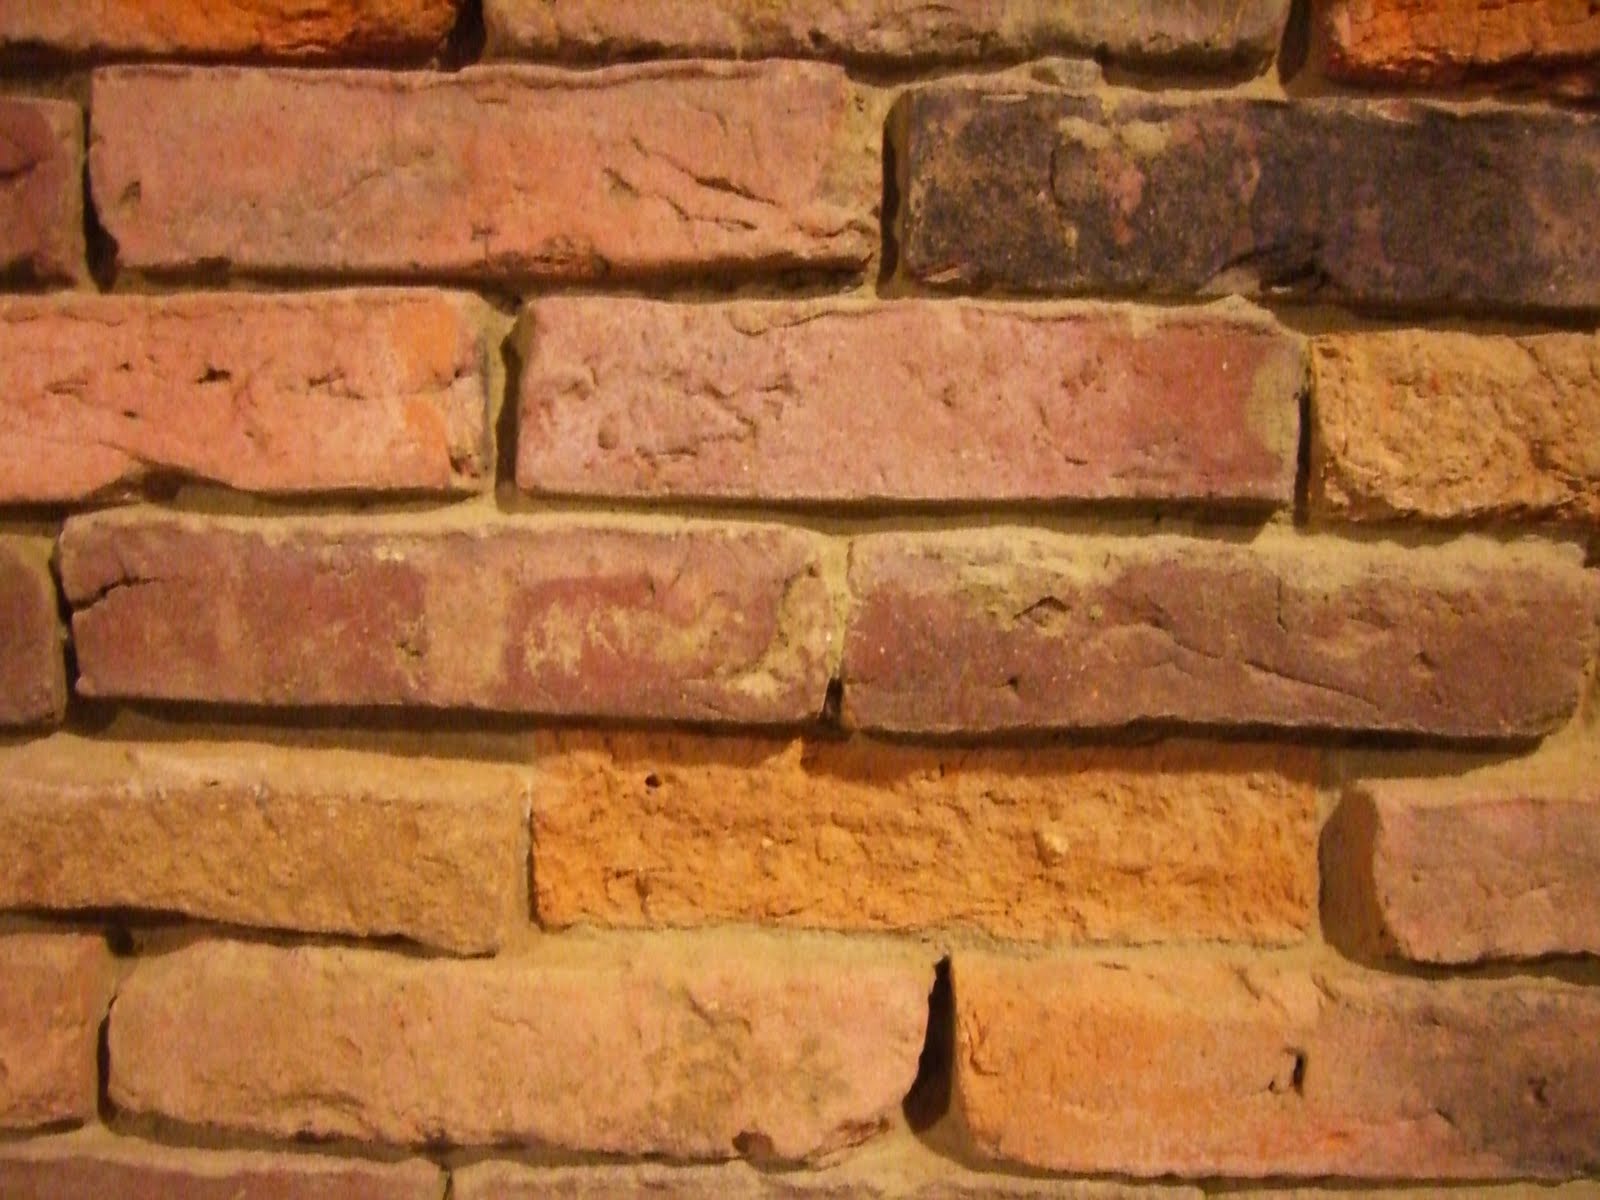 Compliance Bricks and Mortar for December 14 - Compliance Building